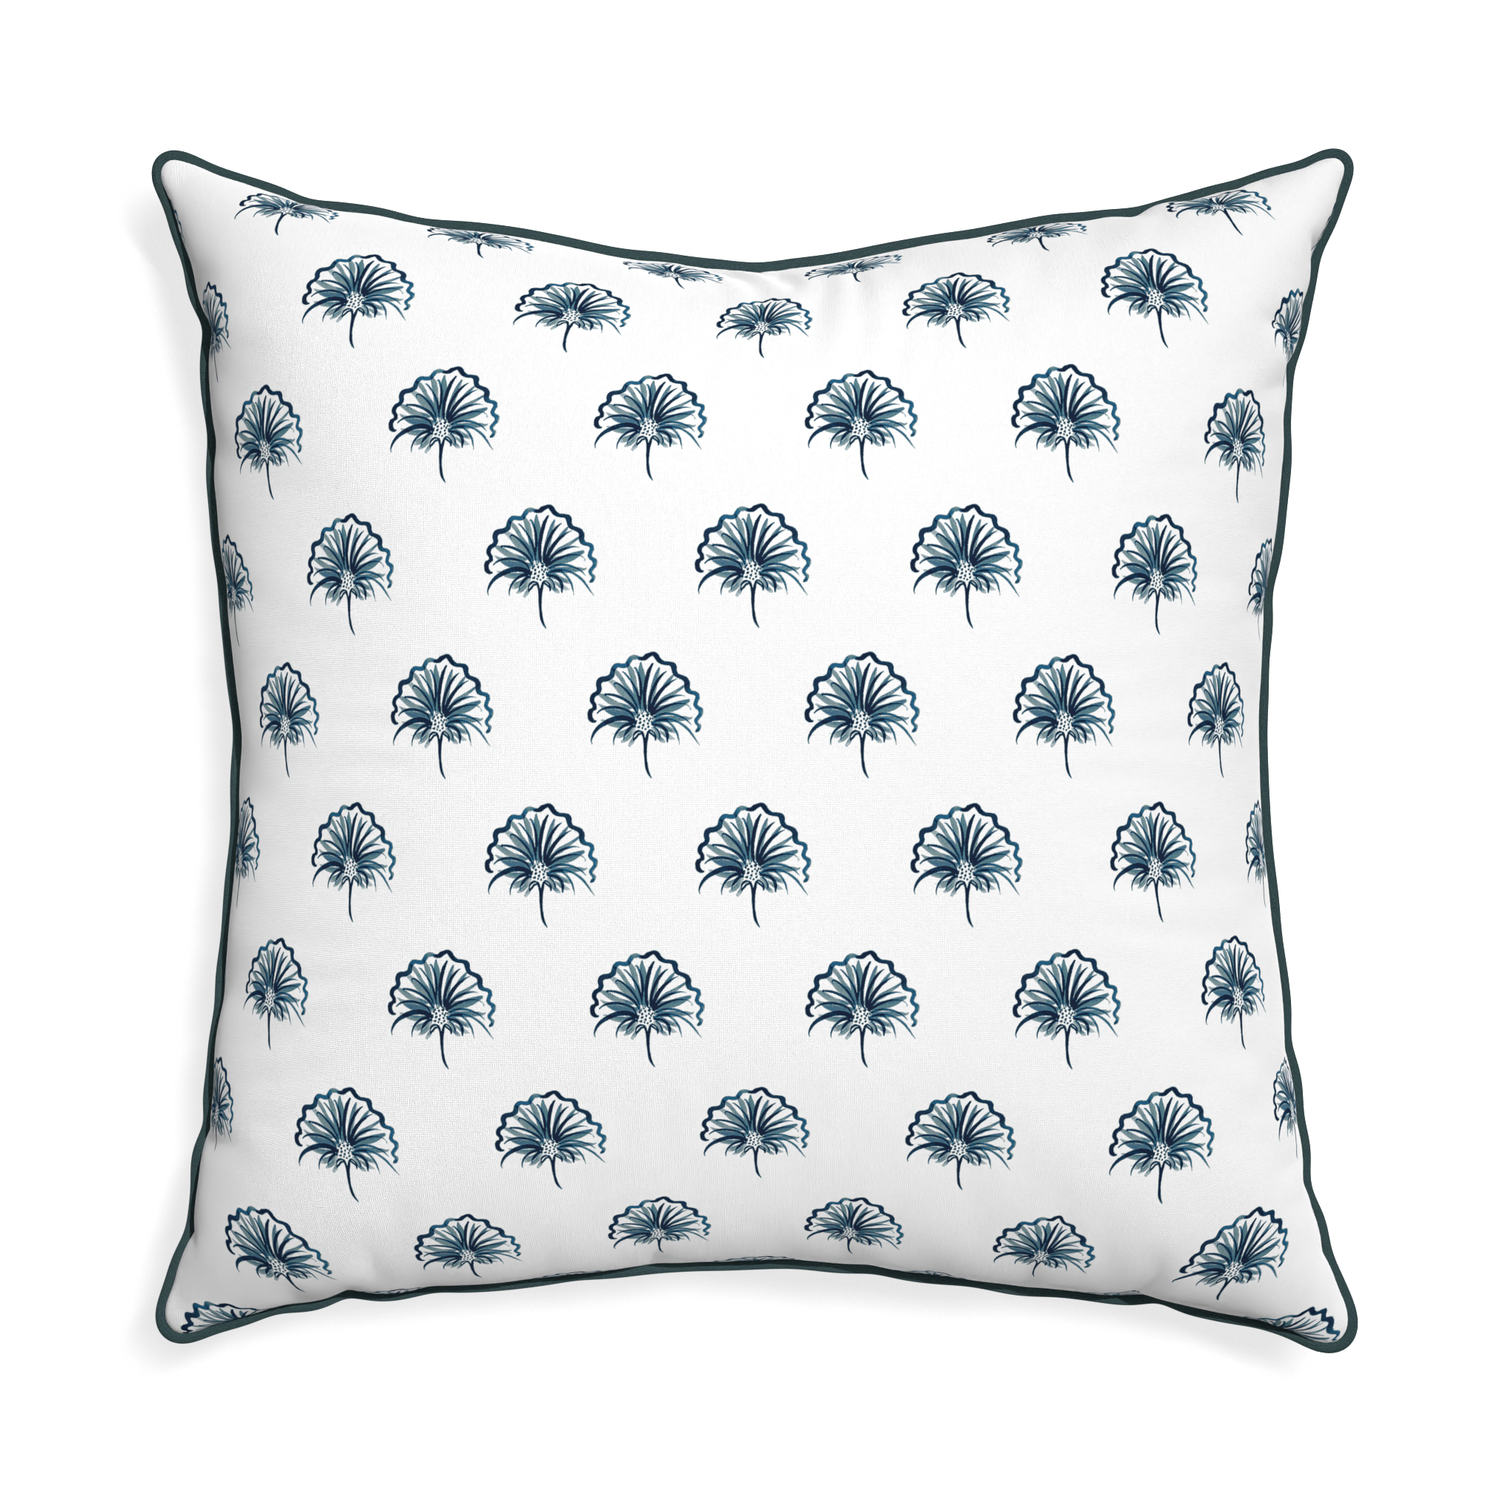 Euro-sham penelope midnight custom floral navypillow with p piping on white background